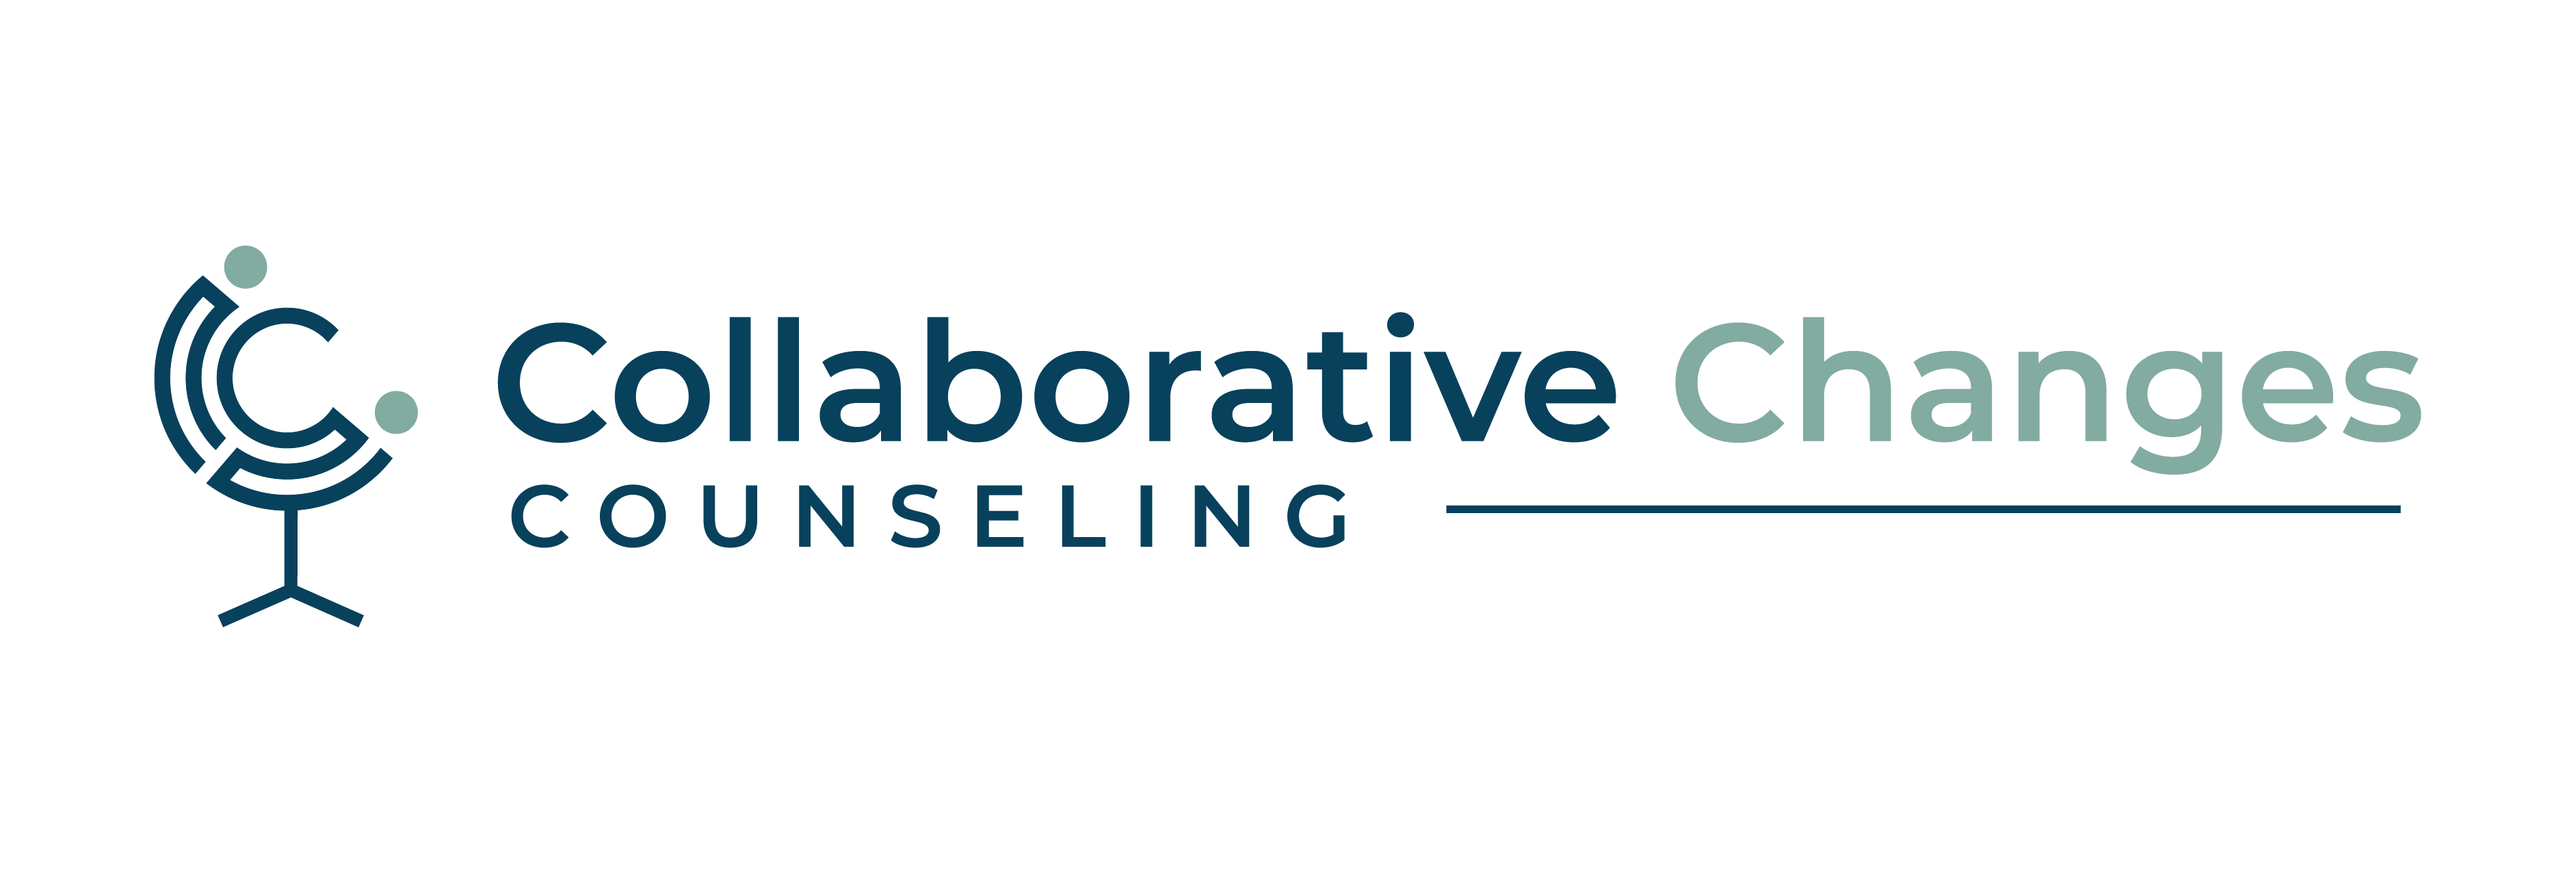 Collaborative Changes Counseling Website